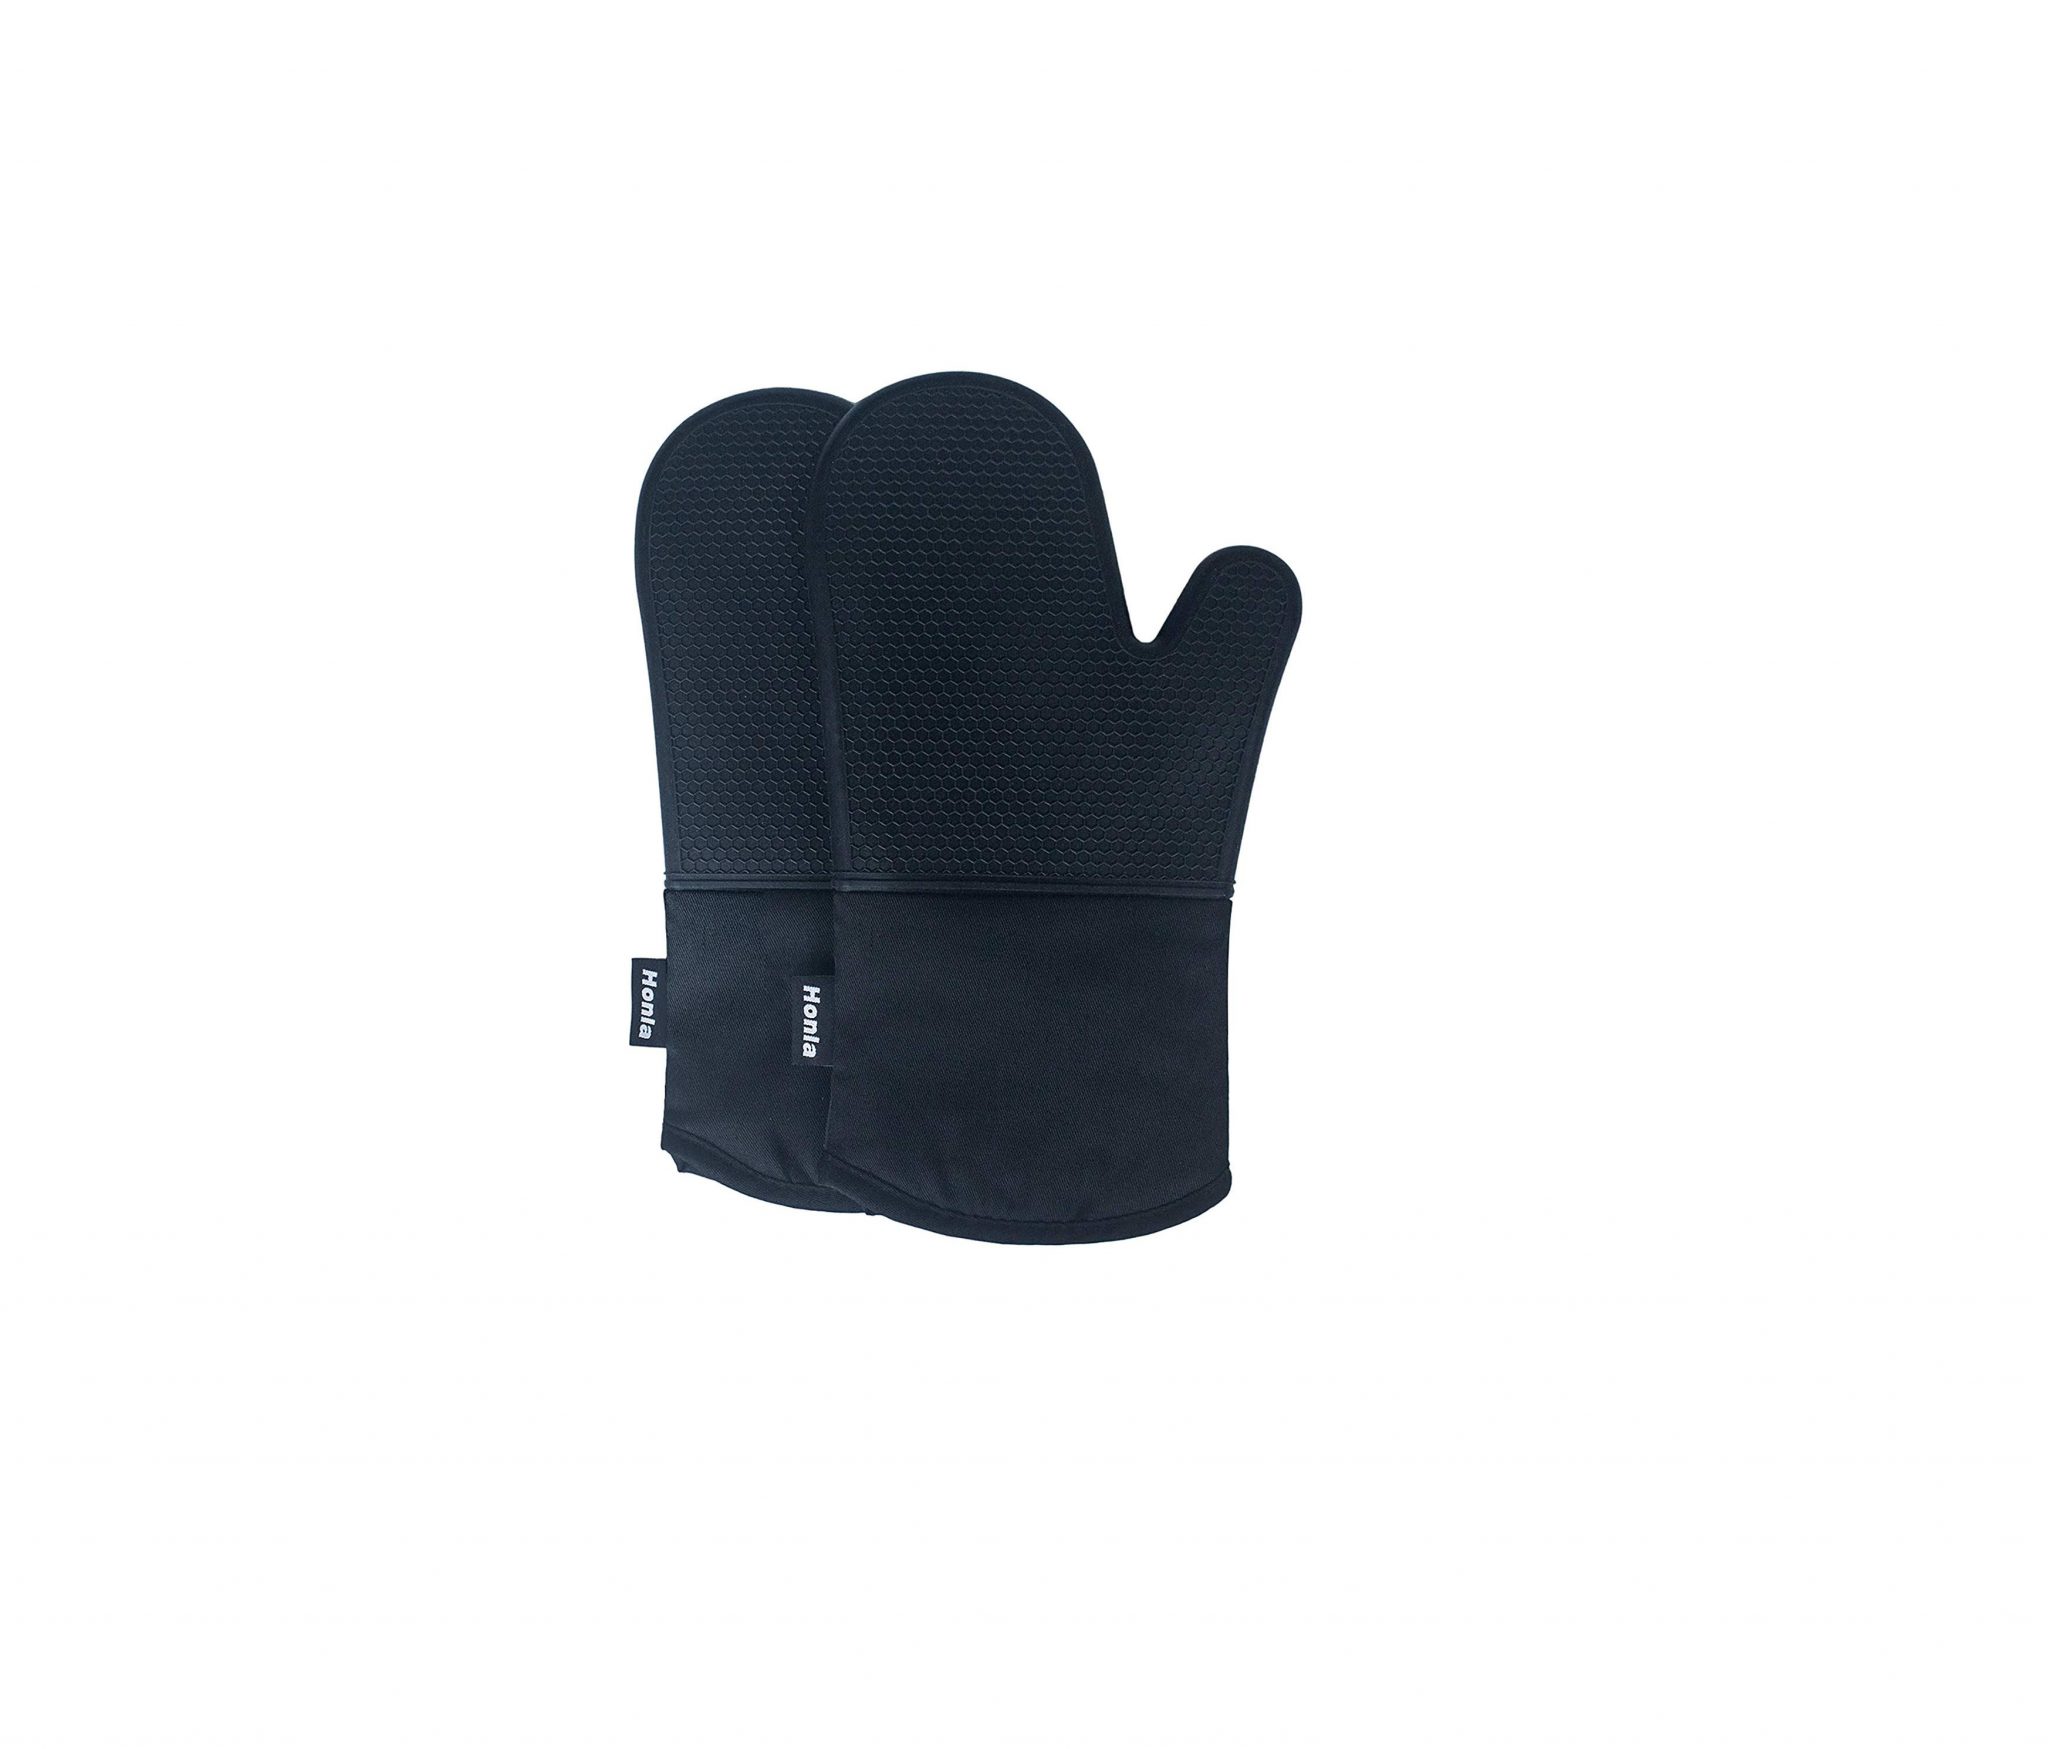 Top 10 Best Oven Mitts in 2021 Reviews | Buyer's Guide